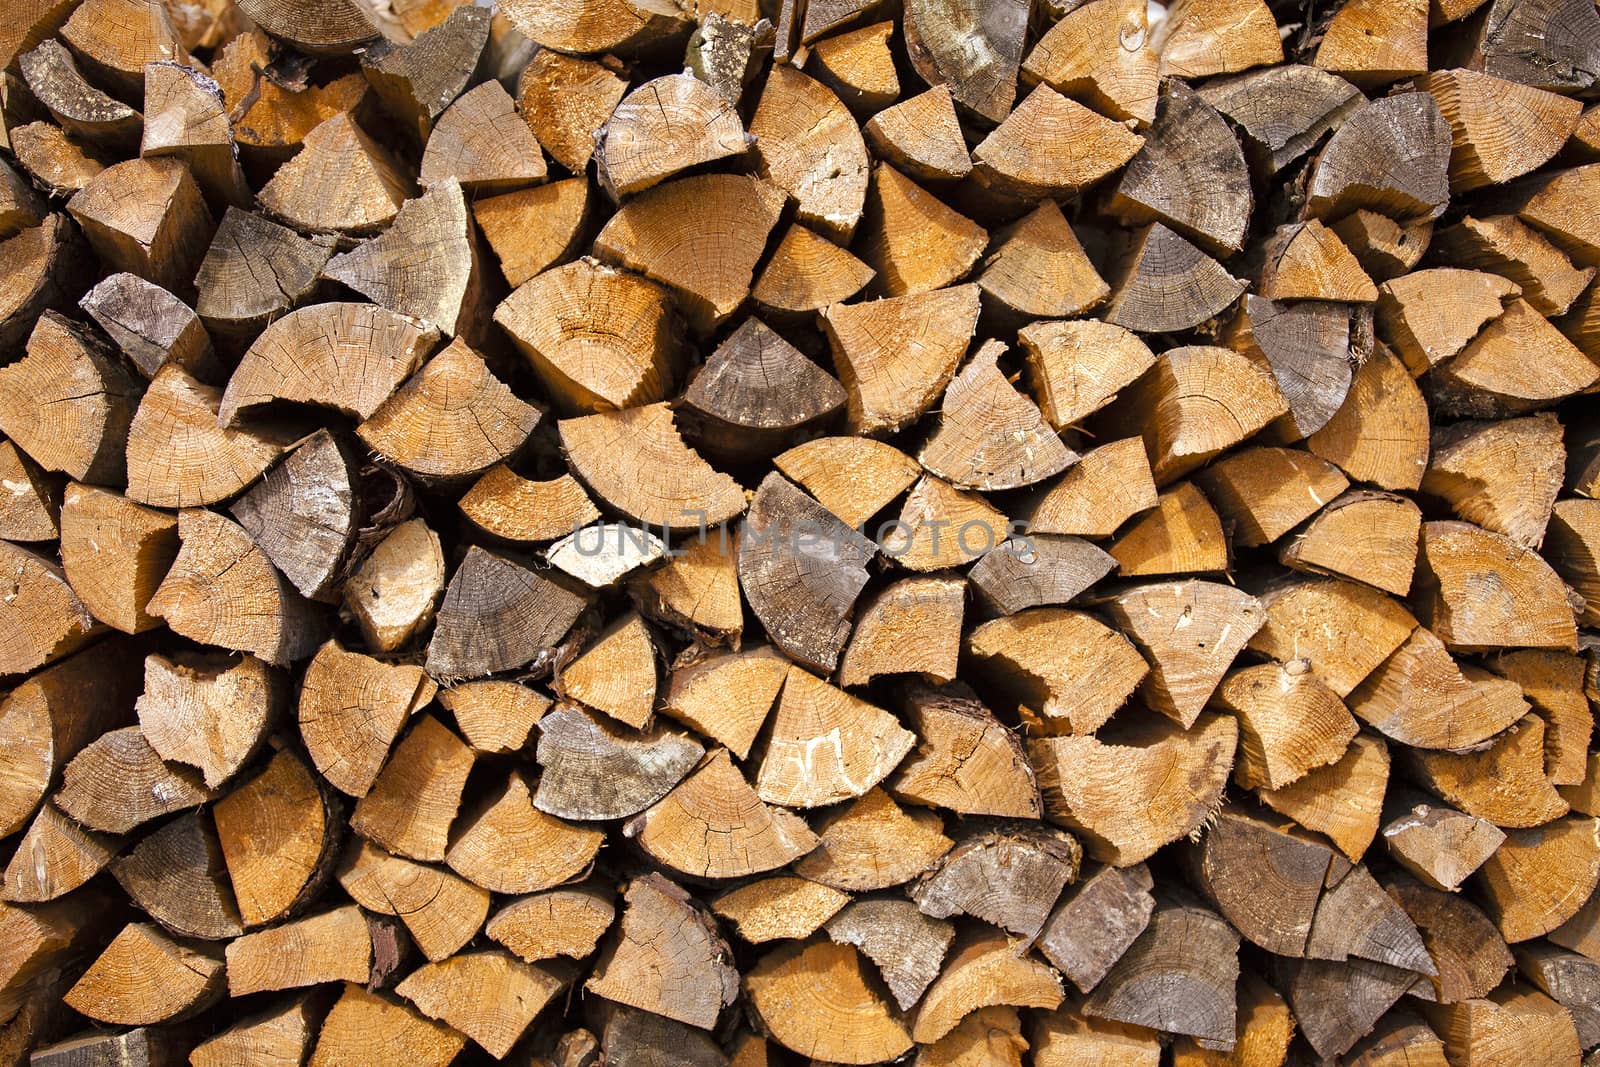  the firewood cut and split into parts. firewood is piled